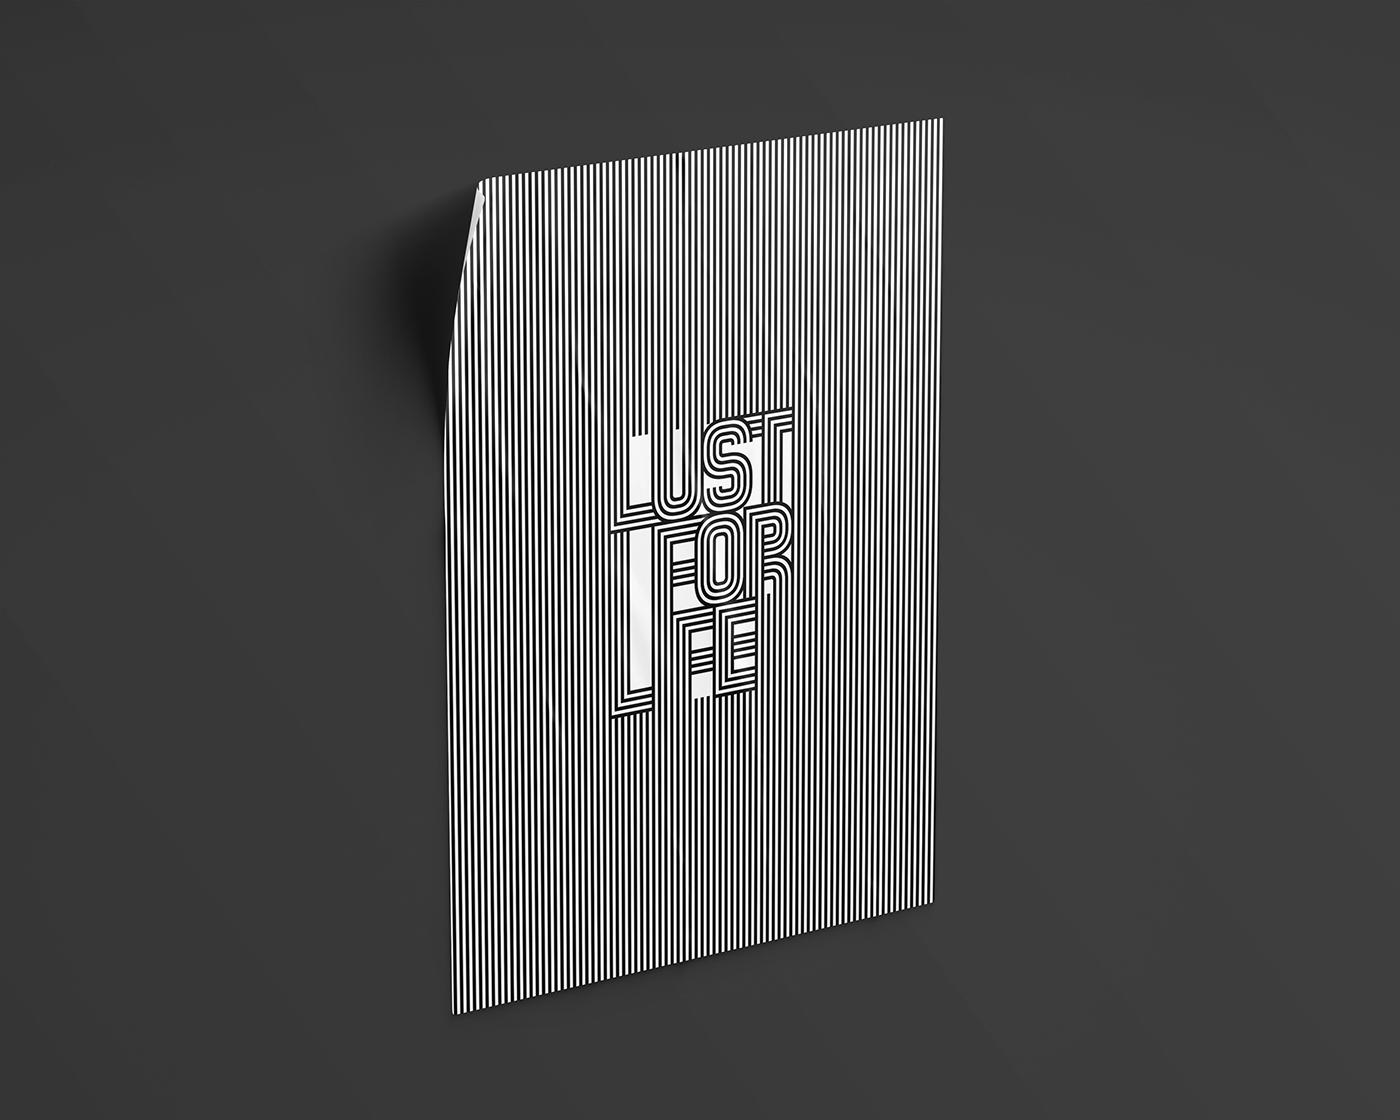 black and white méxico68 op art Patterns psychedelic Variable Font mexico city Retail font stripes type design